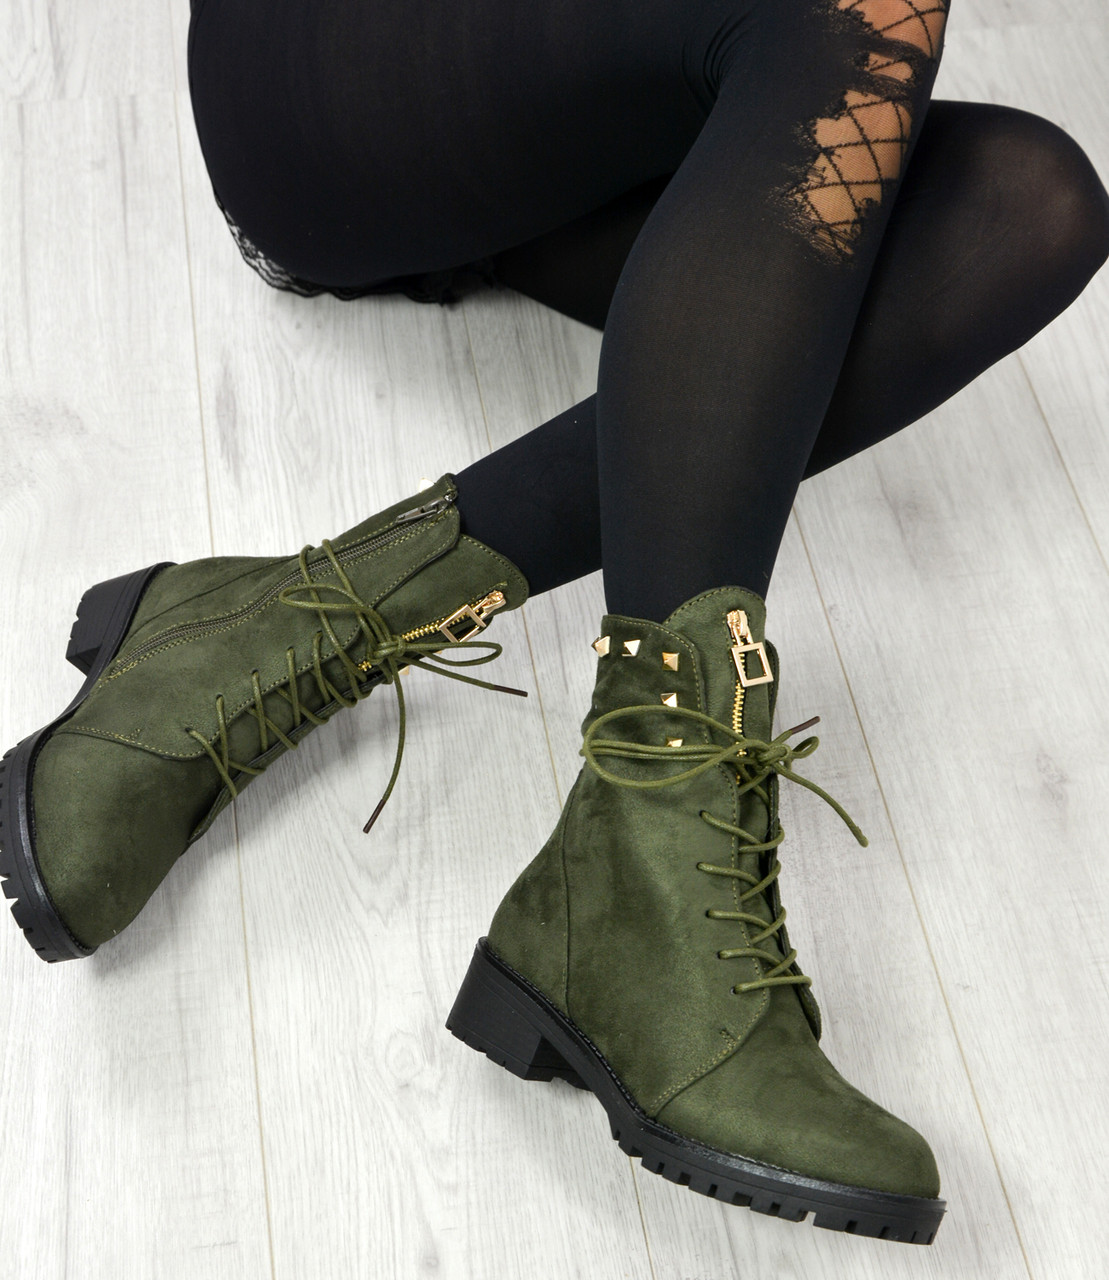 ladies lace up ankle boots